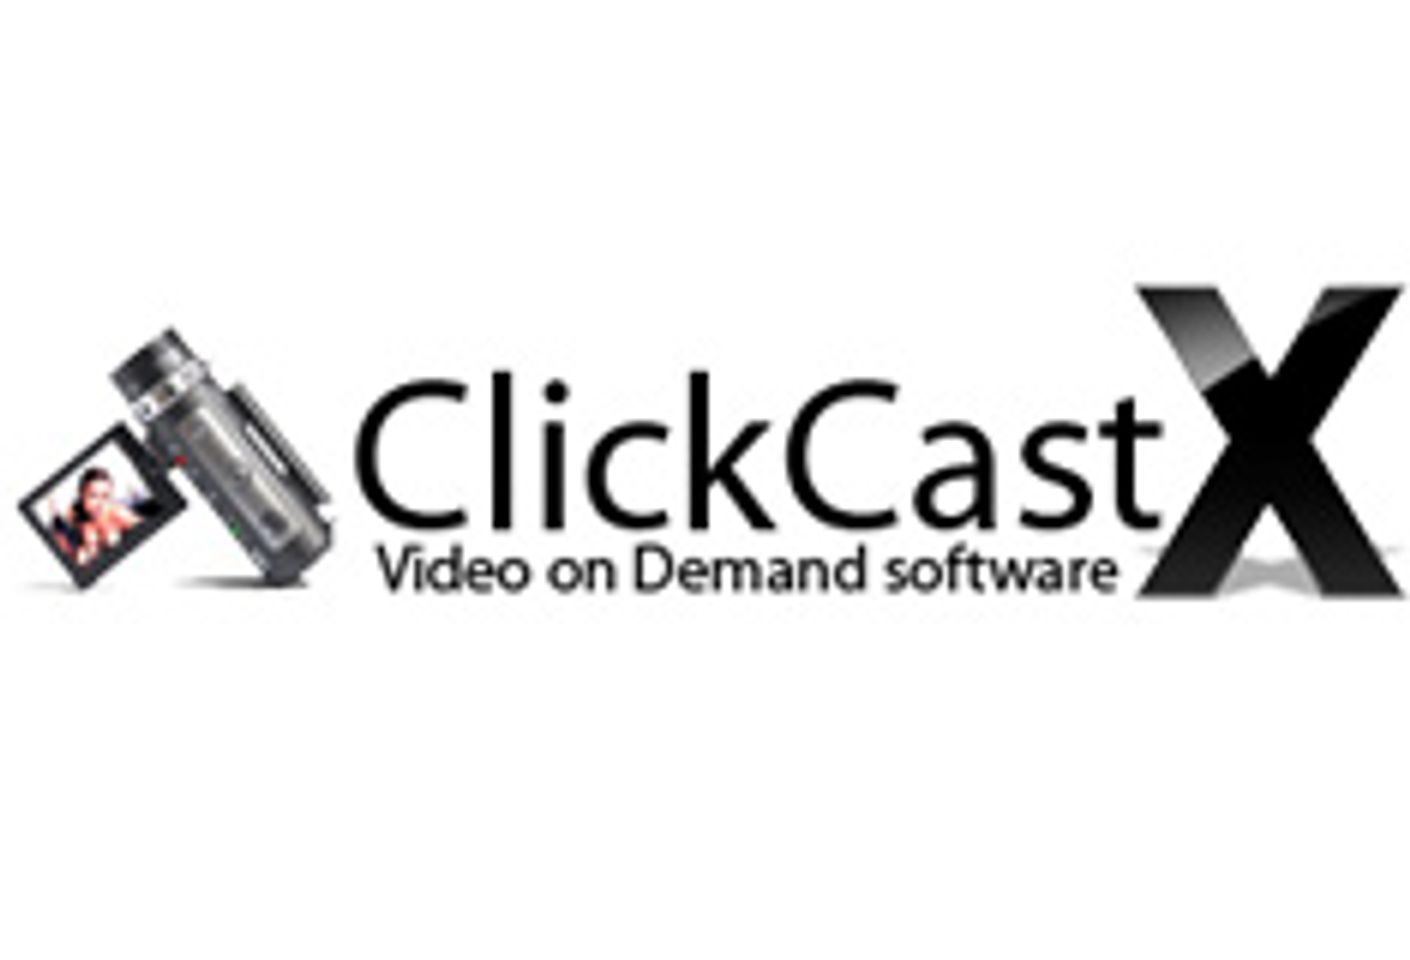 ClickCastX Offers Flash Streaming for Mobile